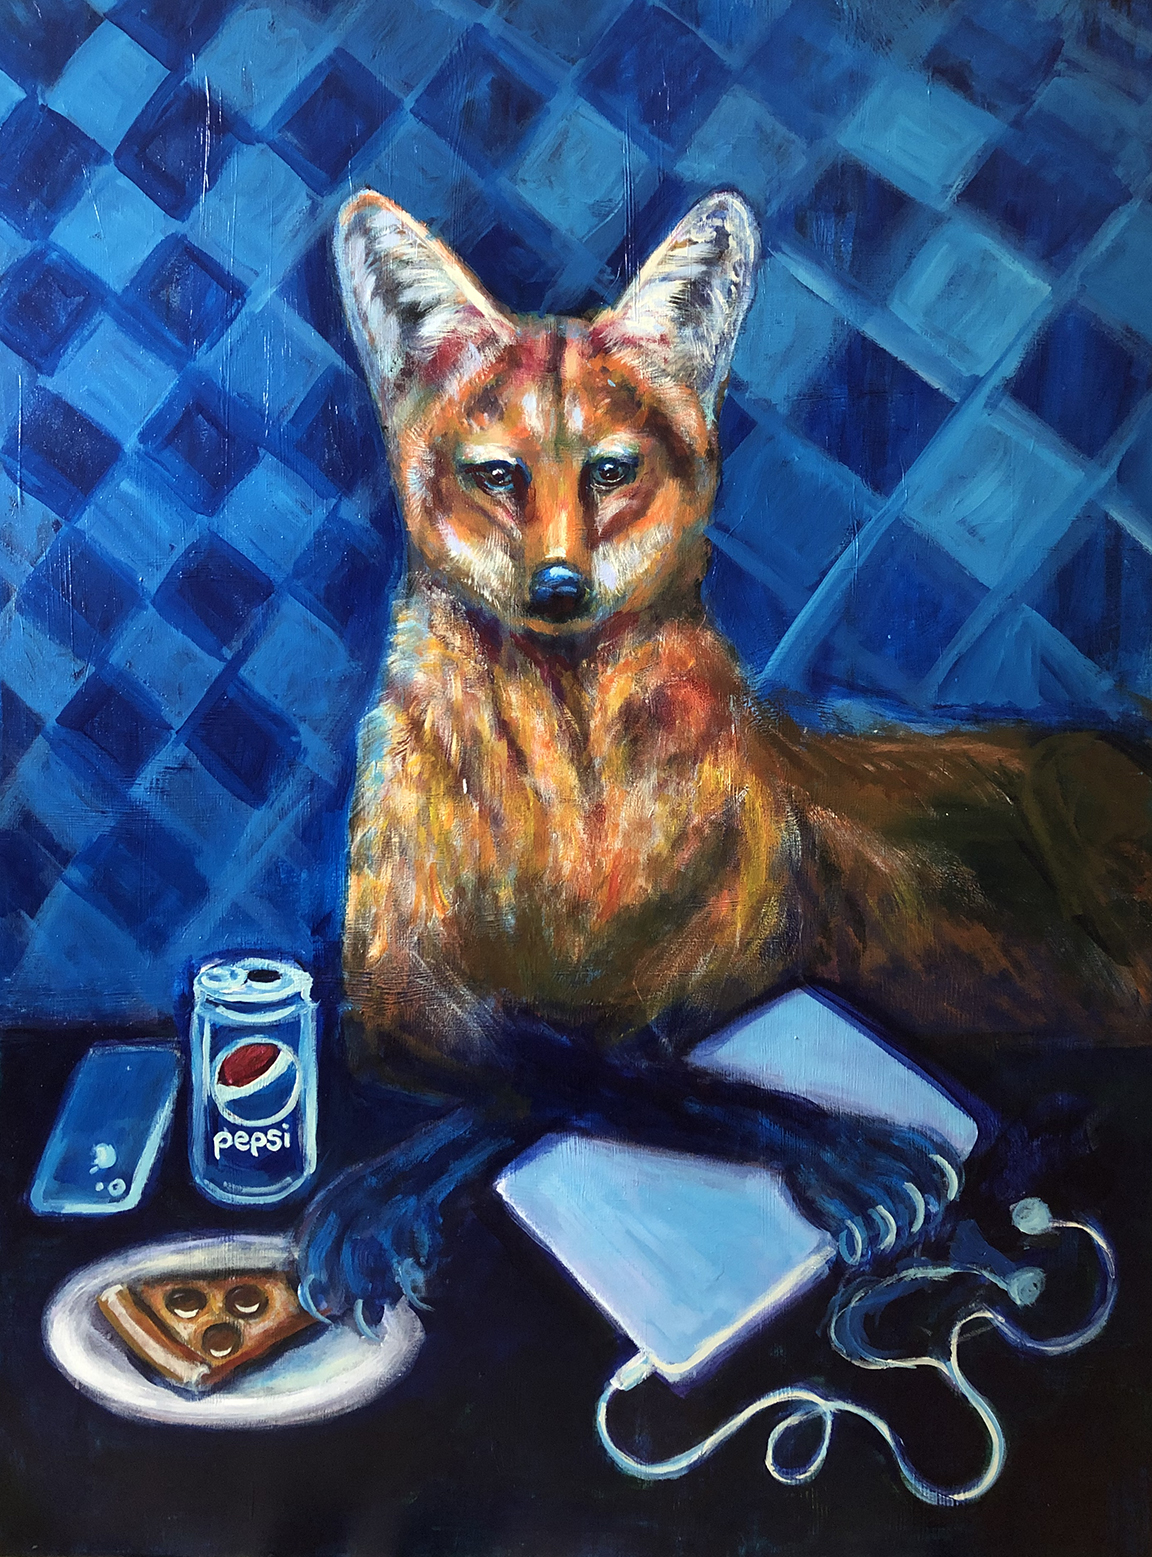 Maned wolf at computer